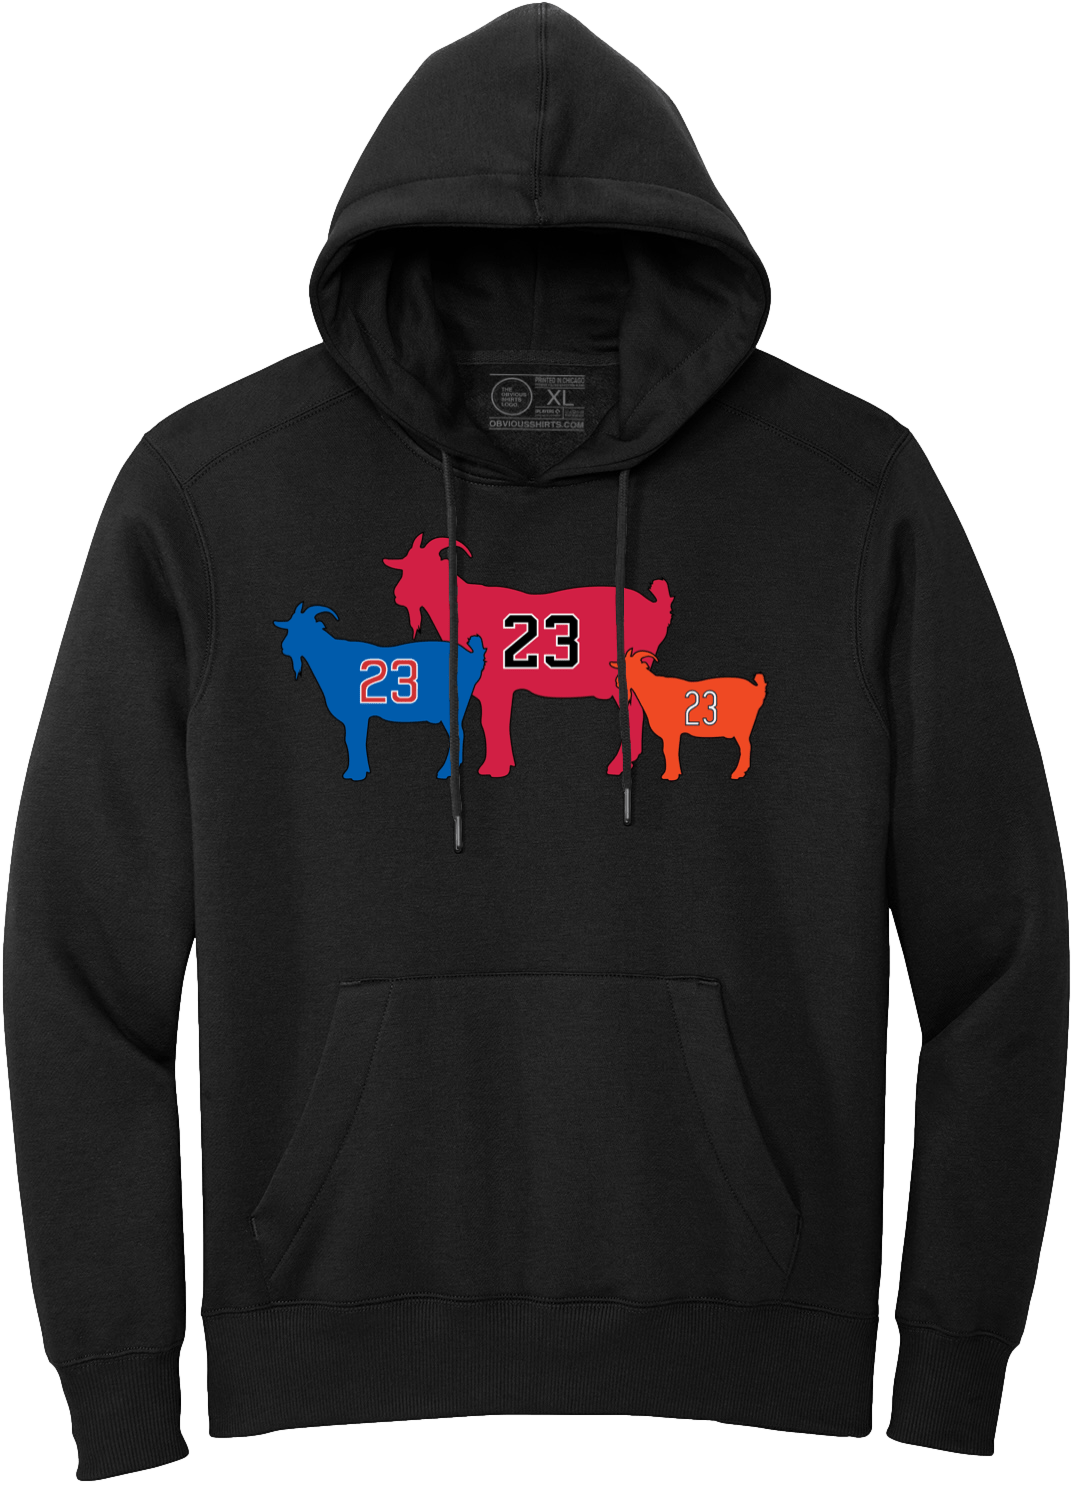 THE CHICAGOATS. (HOODED SWEATSHIRT) - OBVIOUS SHIRTS